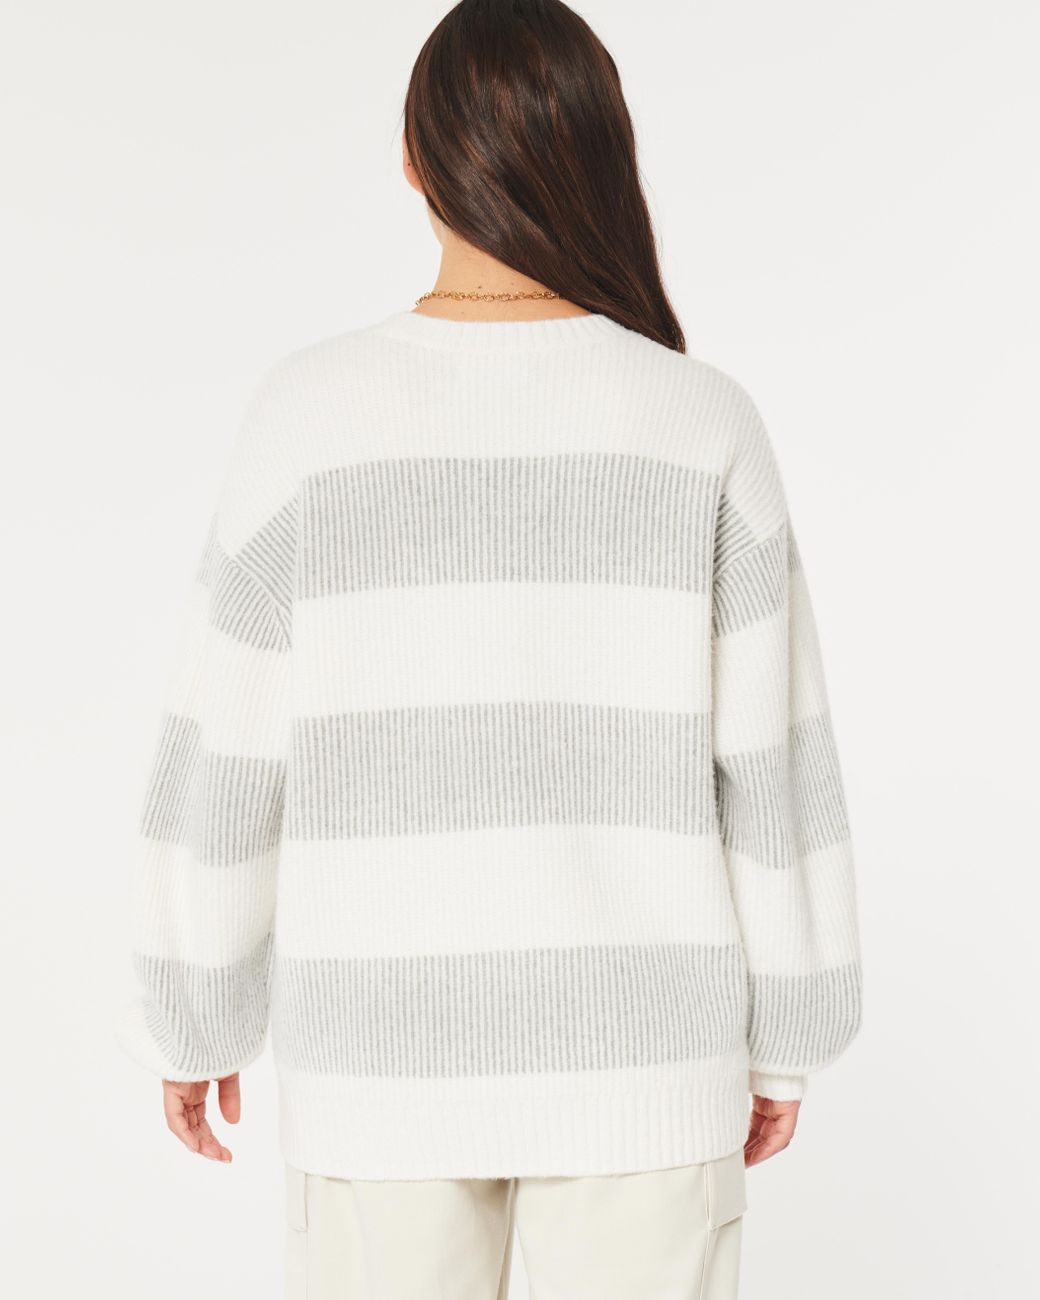 Hollister Big Comfy Sweater in White